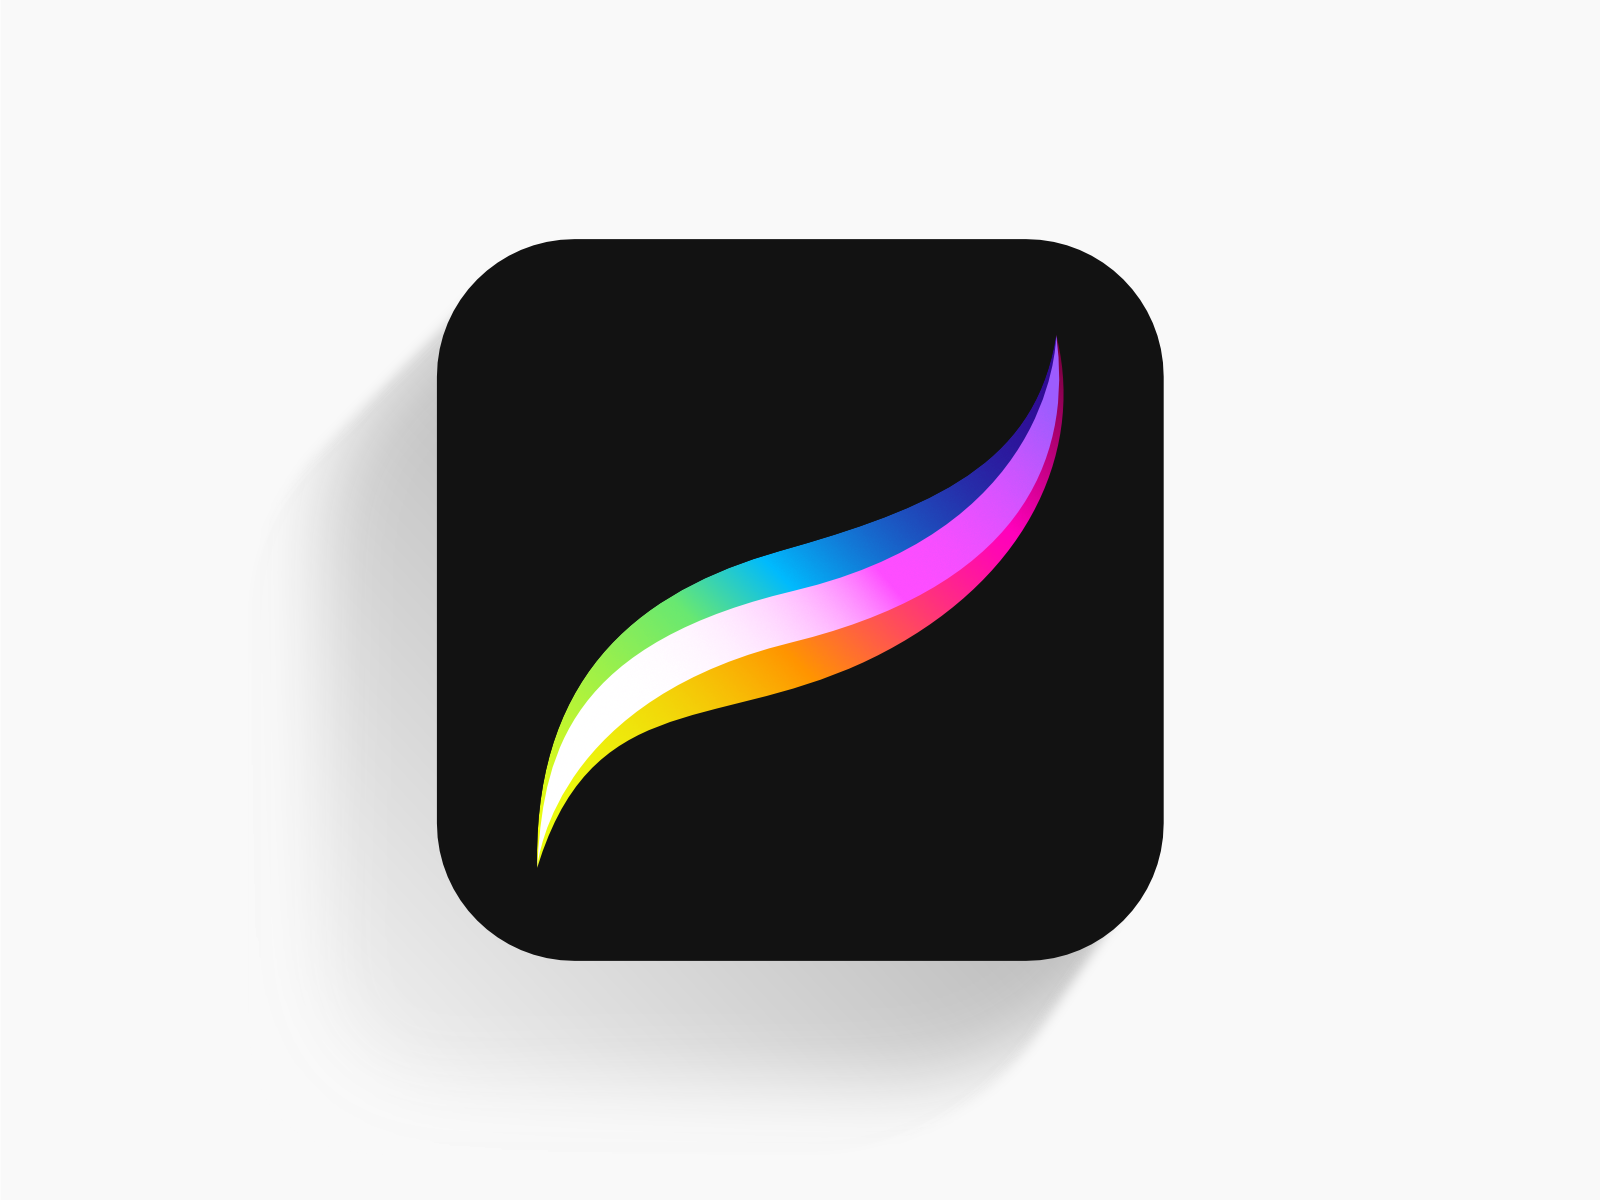 Procreate Logo Redesign by Kyle Chicoine on Dribbble